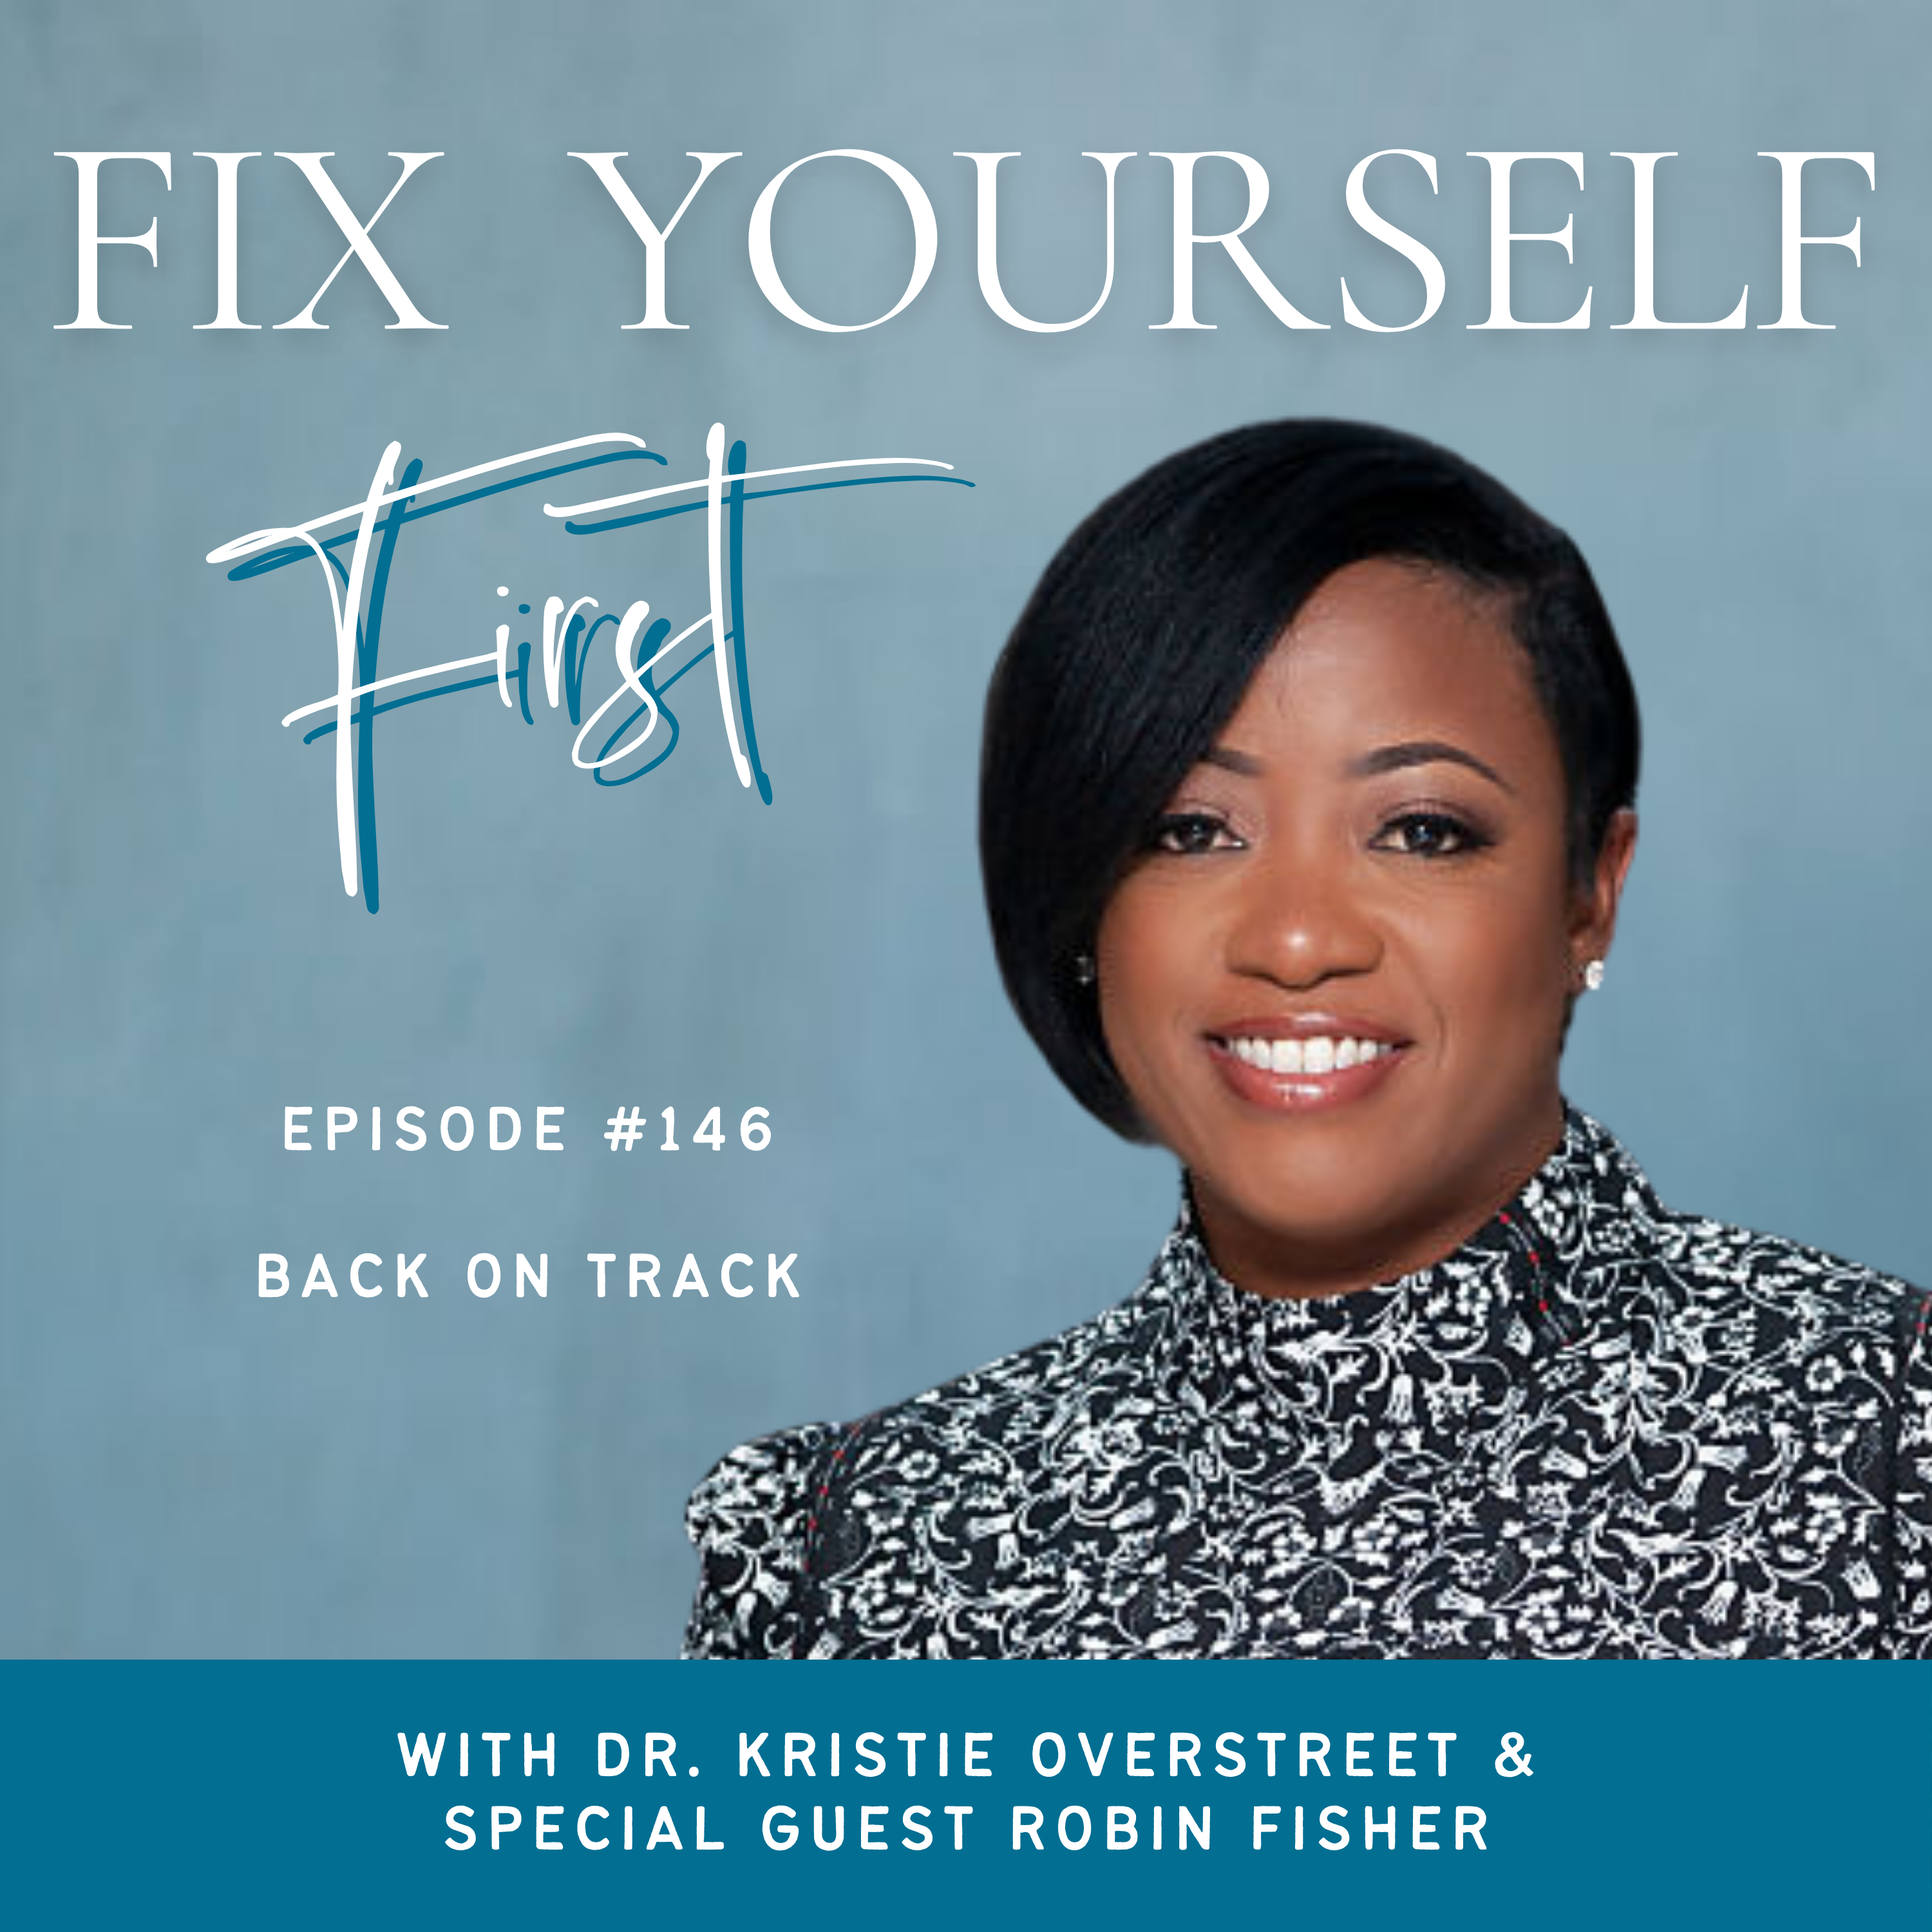 Fix Yourself First Episode 146 Back on Track with Robin Fisher